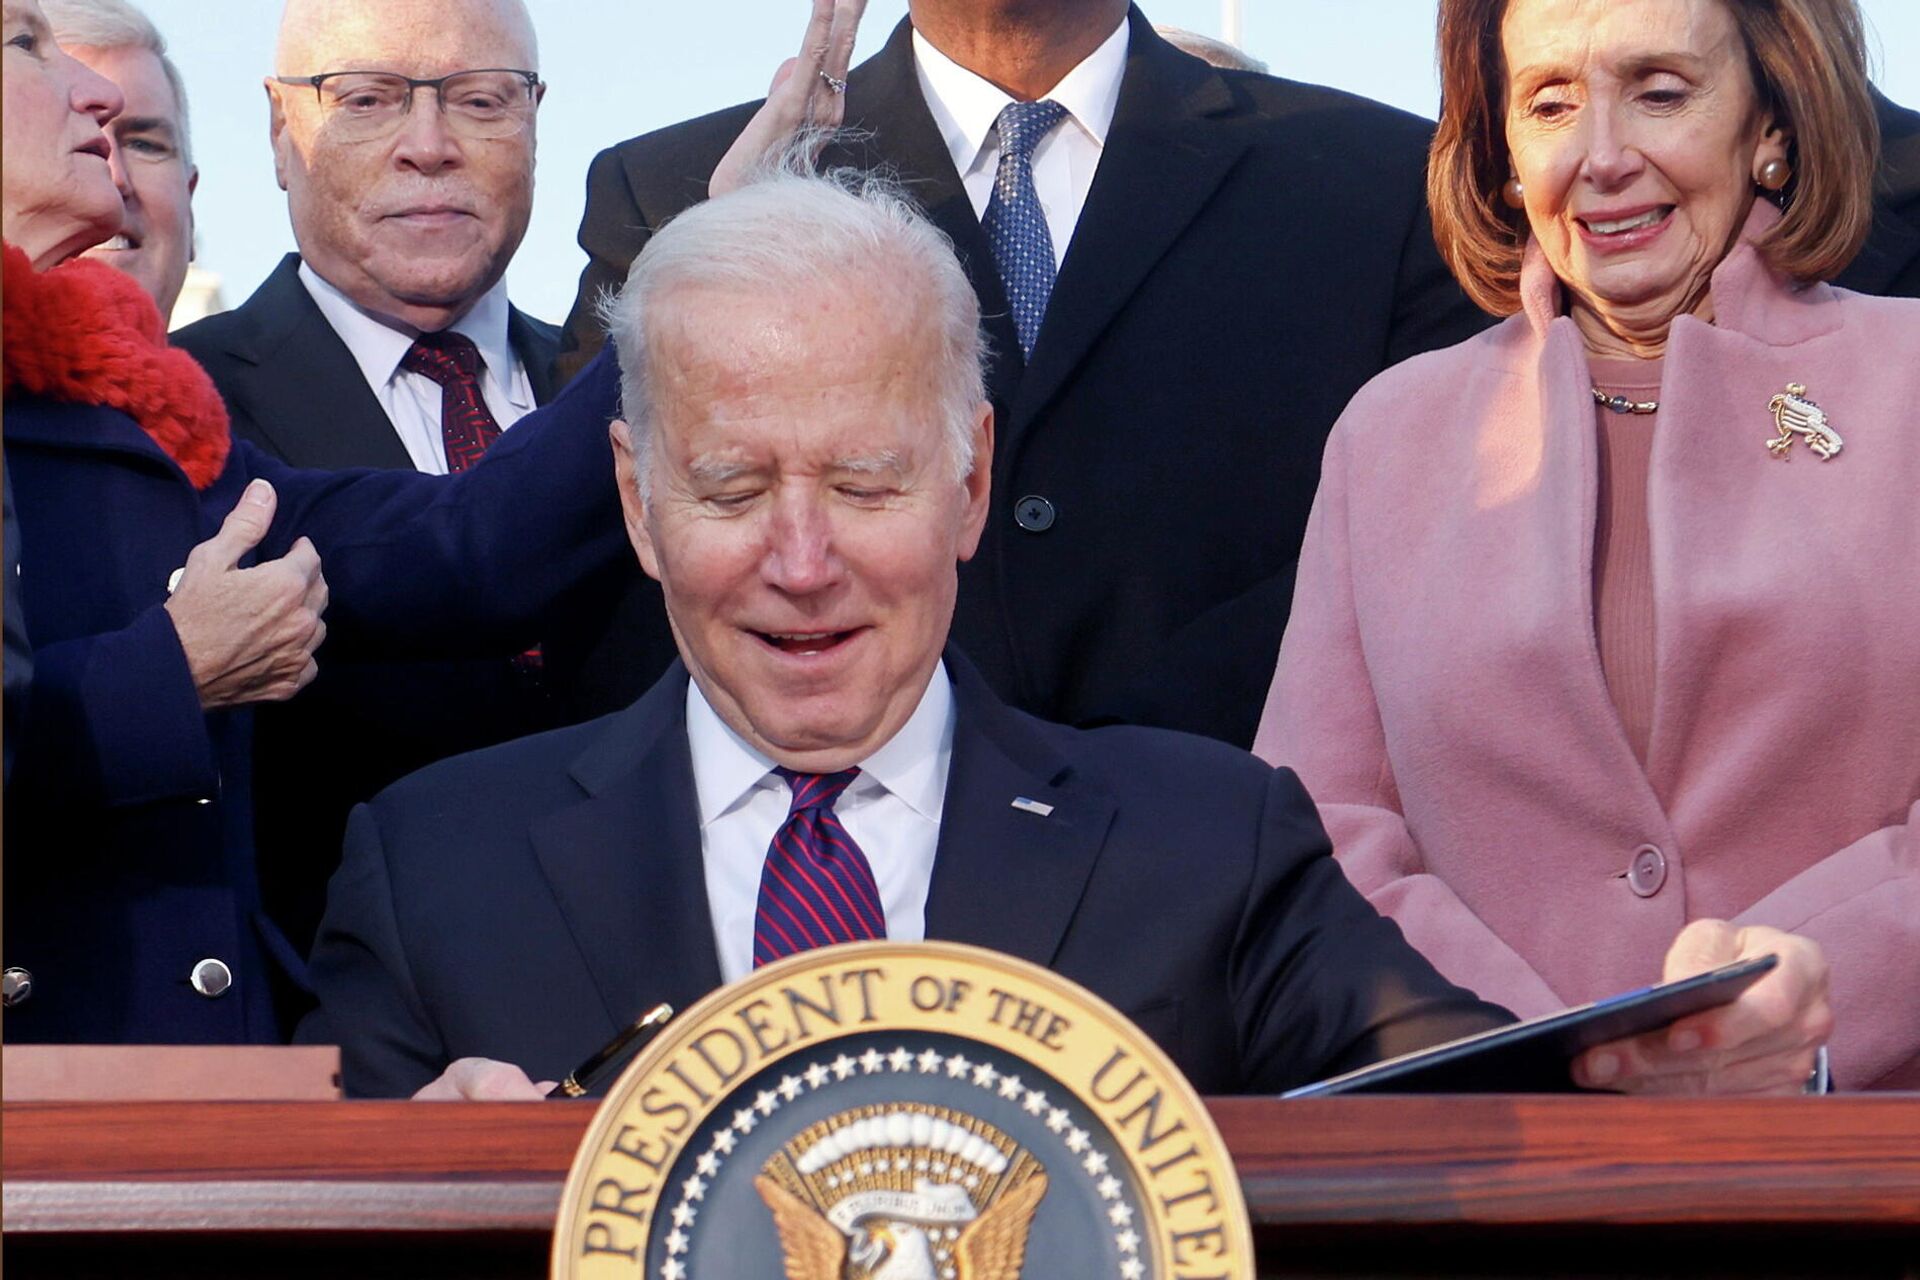 U.S. President Joe Biden celebrates with lawmakers including ‪House Speaker Nancy Pelosi (D-CA) before signing the Infrastructure Investment and Jobs Act on the South Lawn at the White House in Washington, U.S. November 15, 2021. - Sputnik International, 1920, 17.11.2021